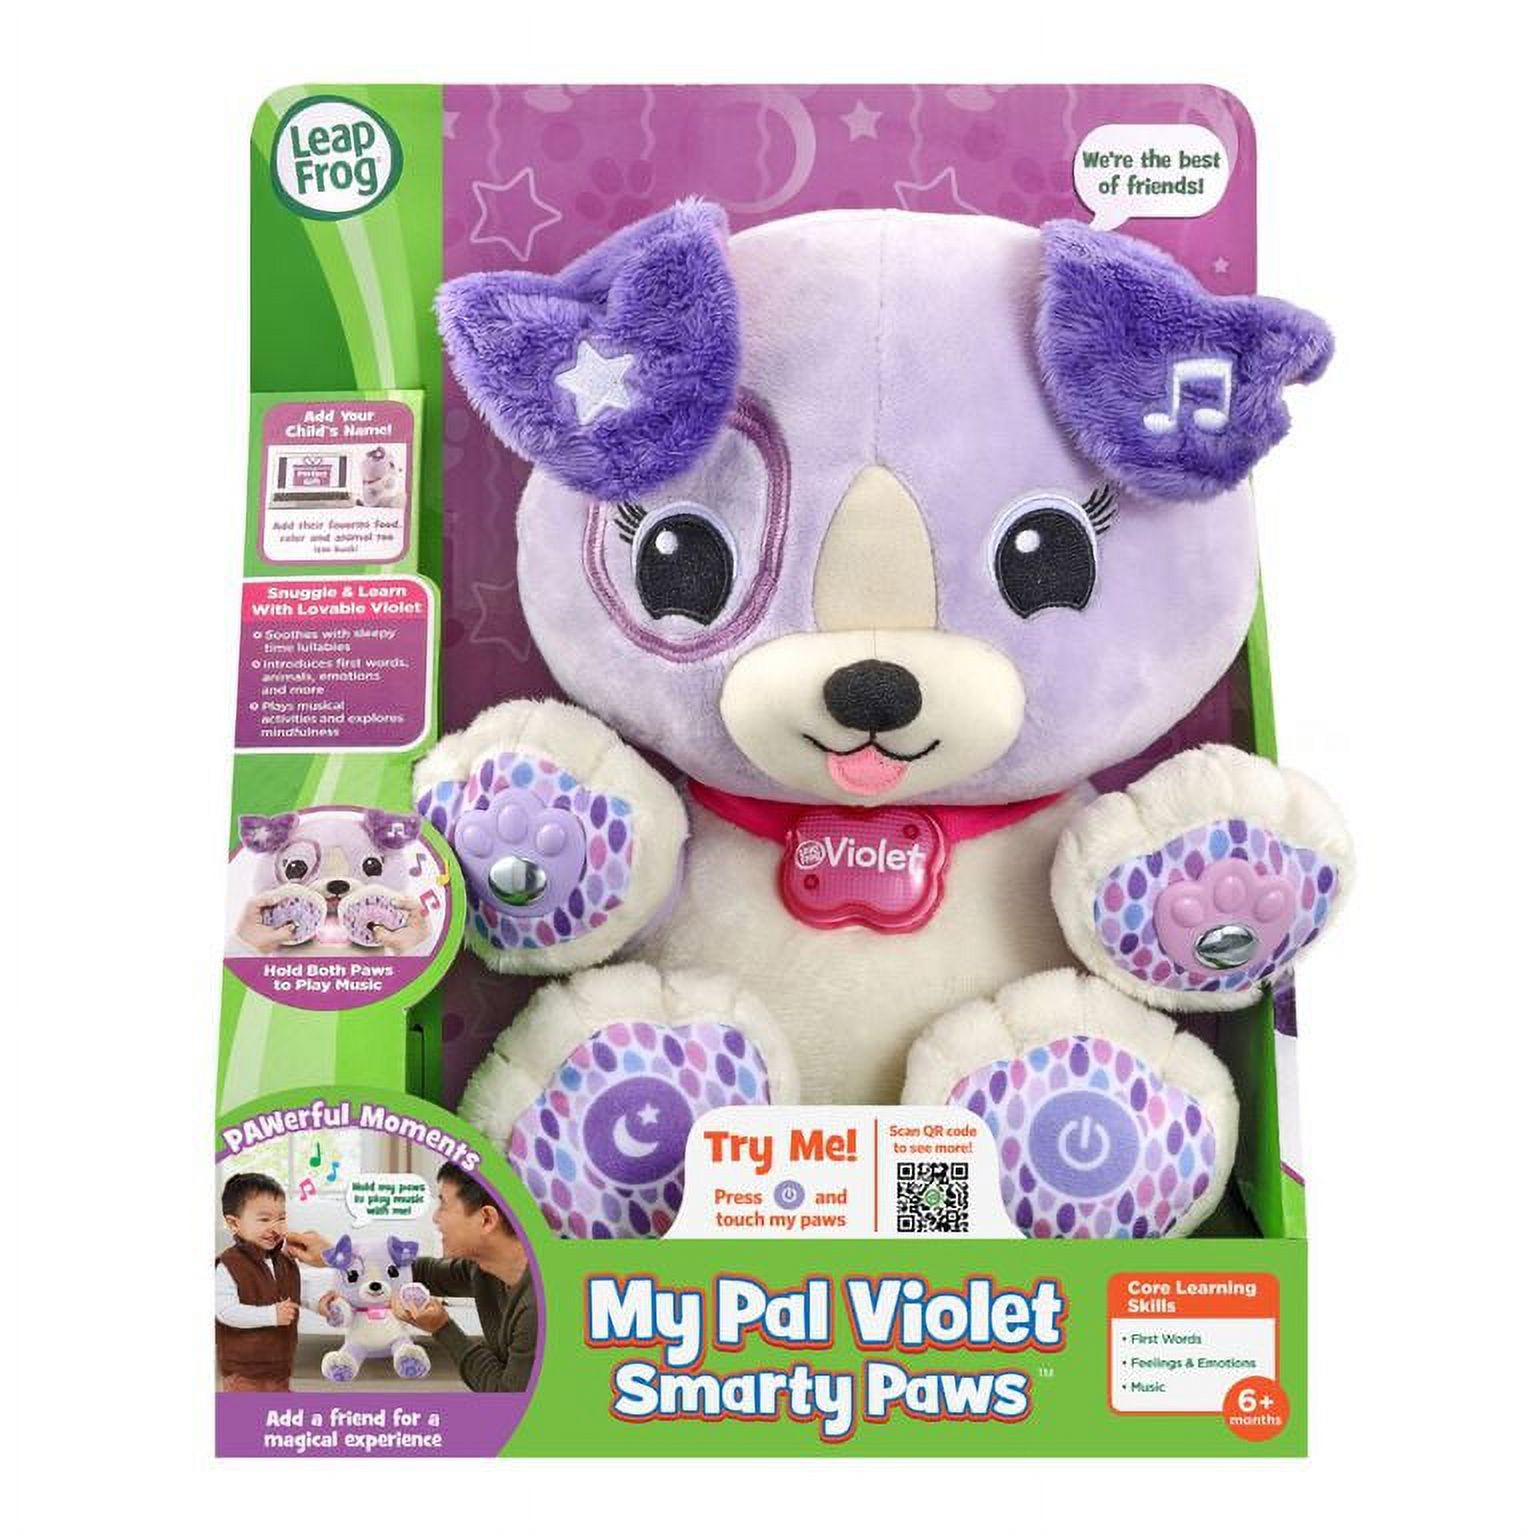 LeapFrog: My pal Violet smarty paws (English version) - image 1 of 6